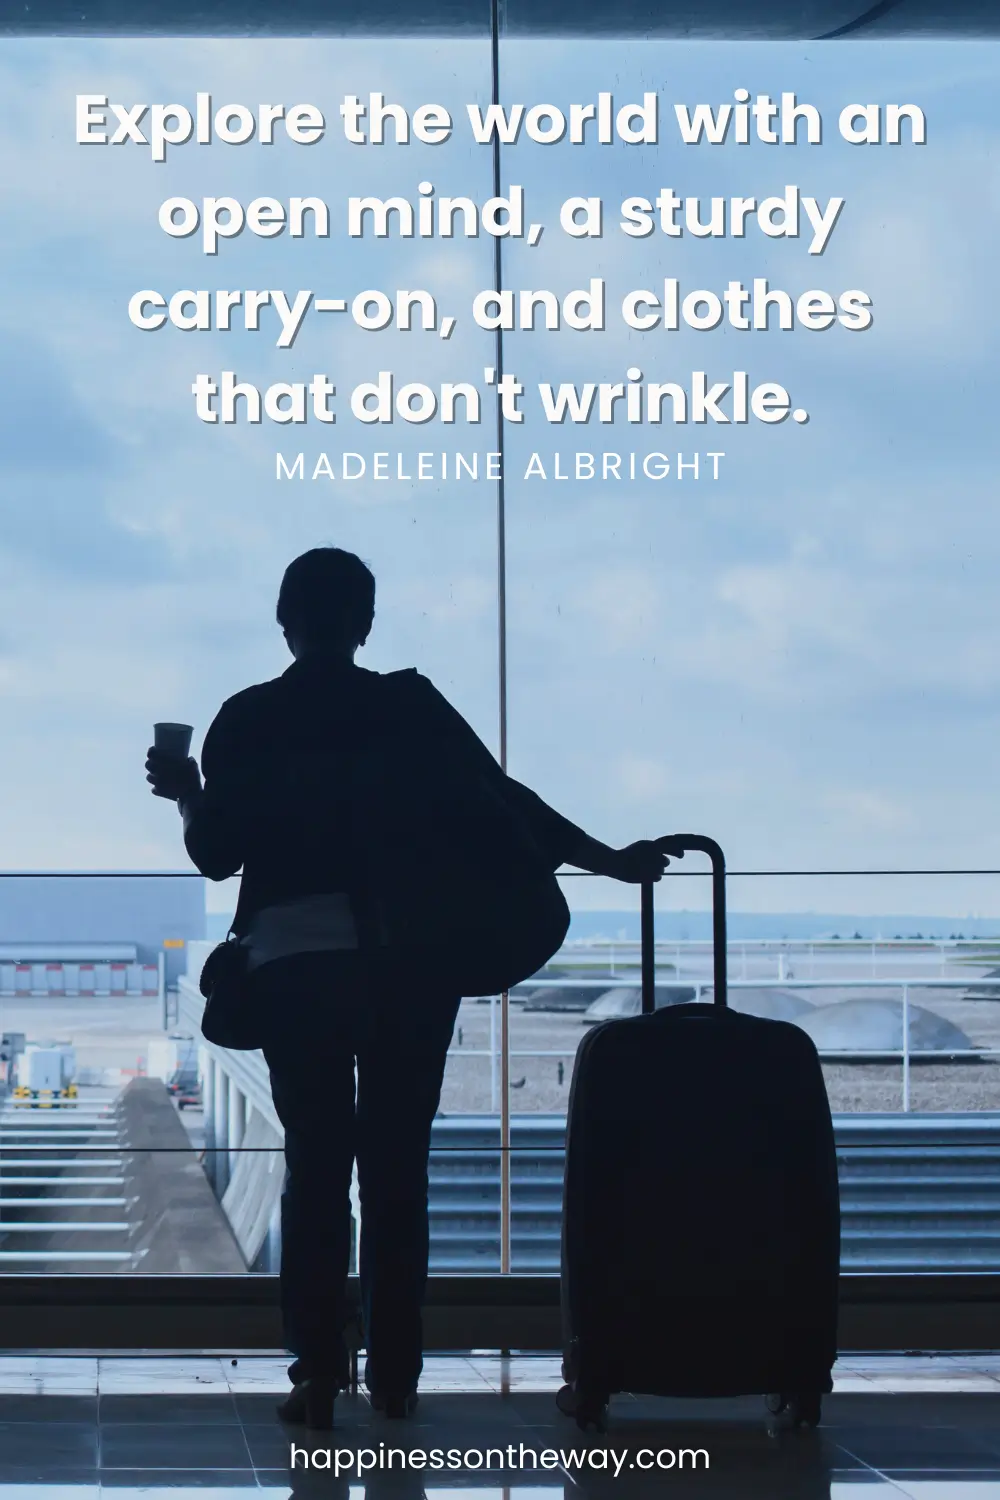 A woman looking outside from an airport window, holding a coffee mug and a luggage with a quote: Explore the world with an open mind, a sturdy carry-on, and clothes that don't wrinkle by Madeleine Albright.